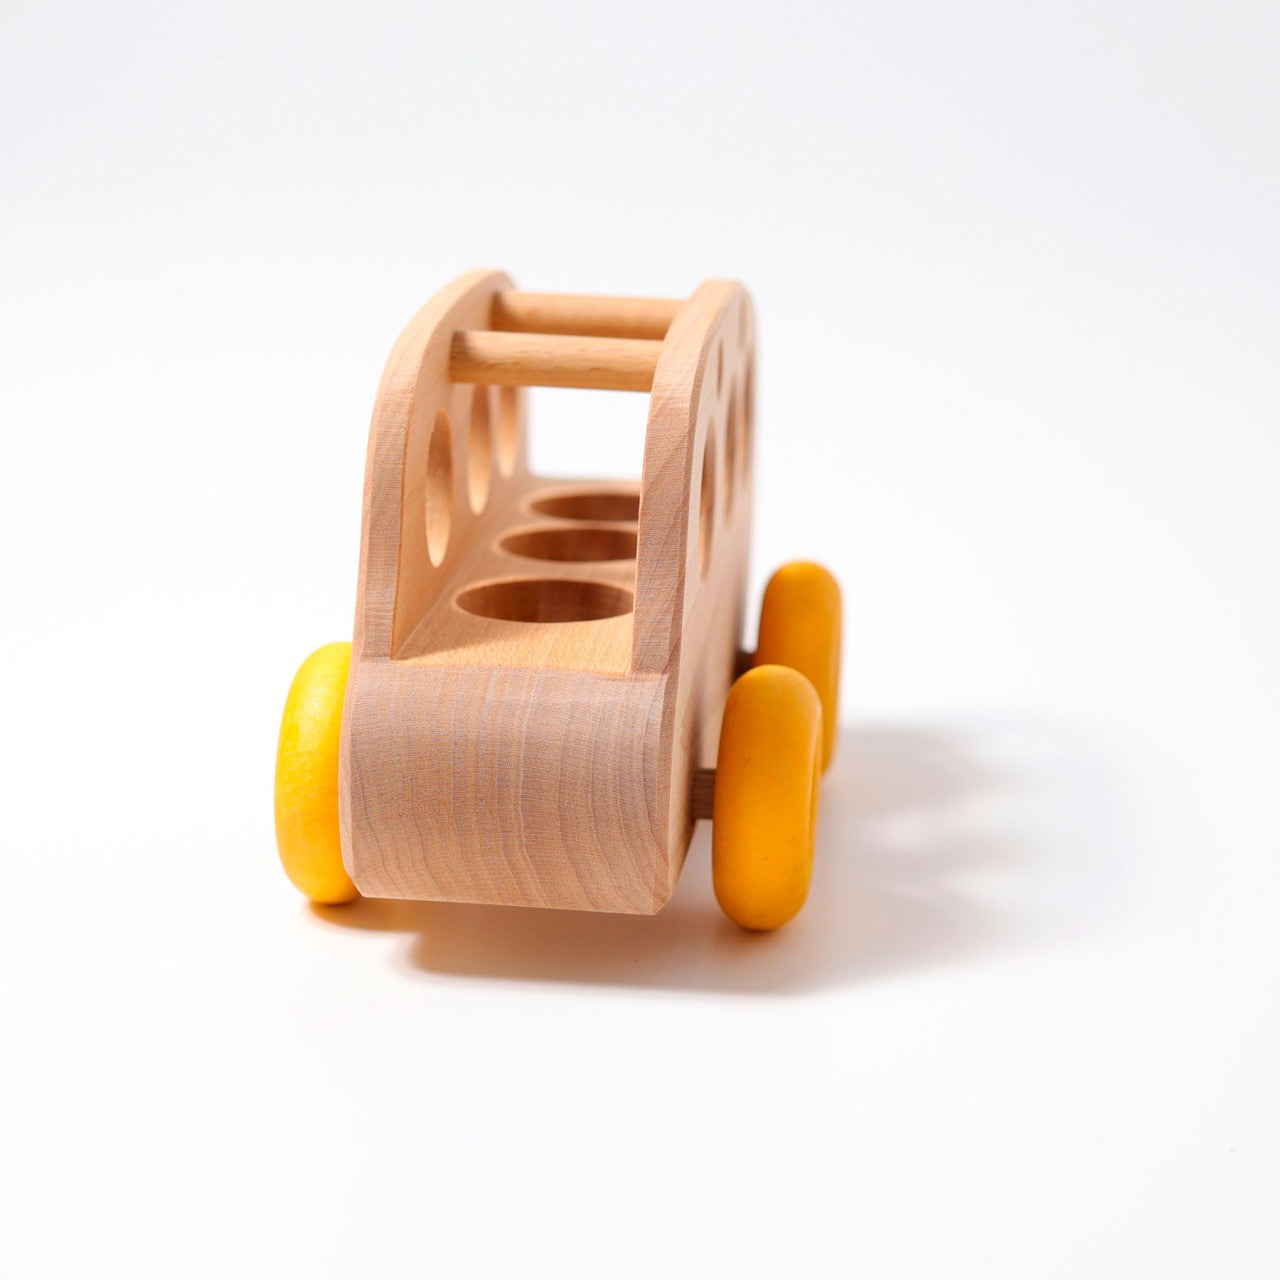 Bus | Wooden Imaginative Play Toys